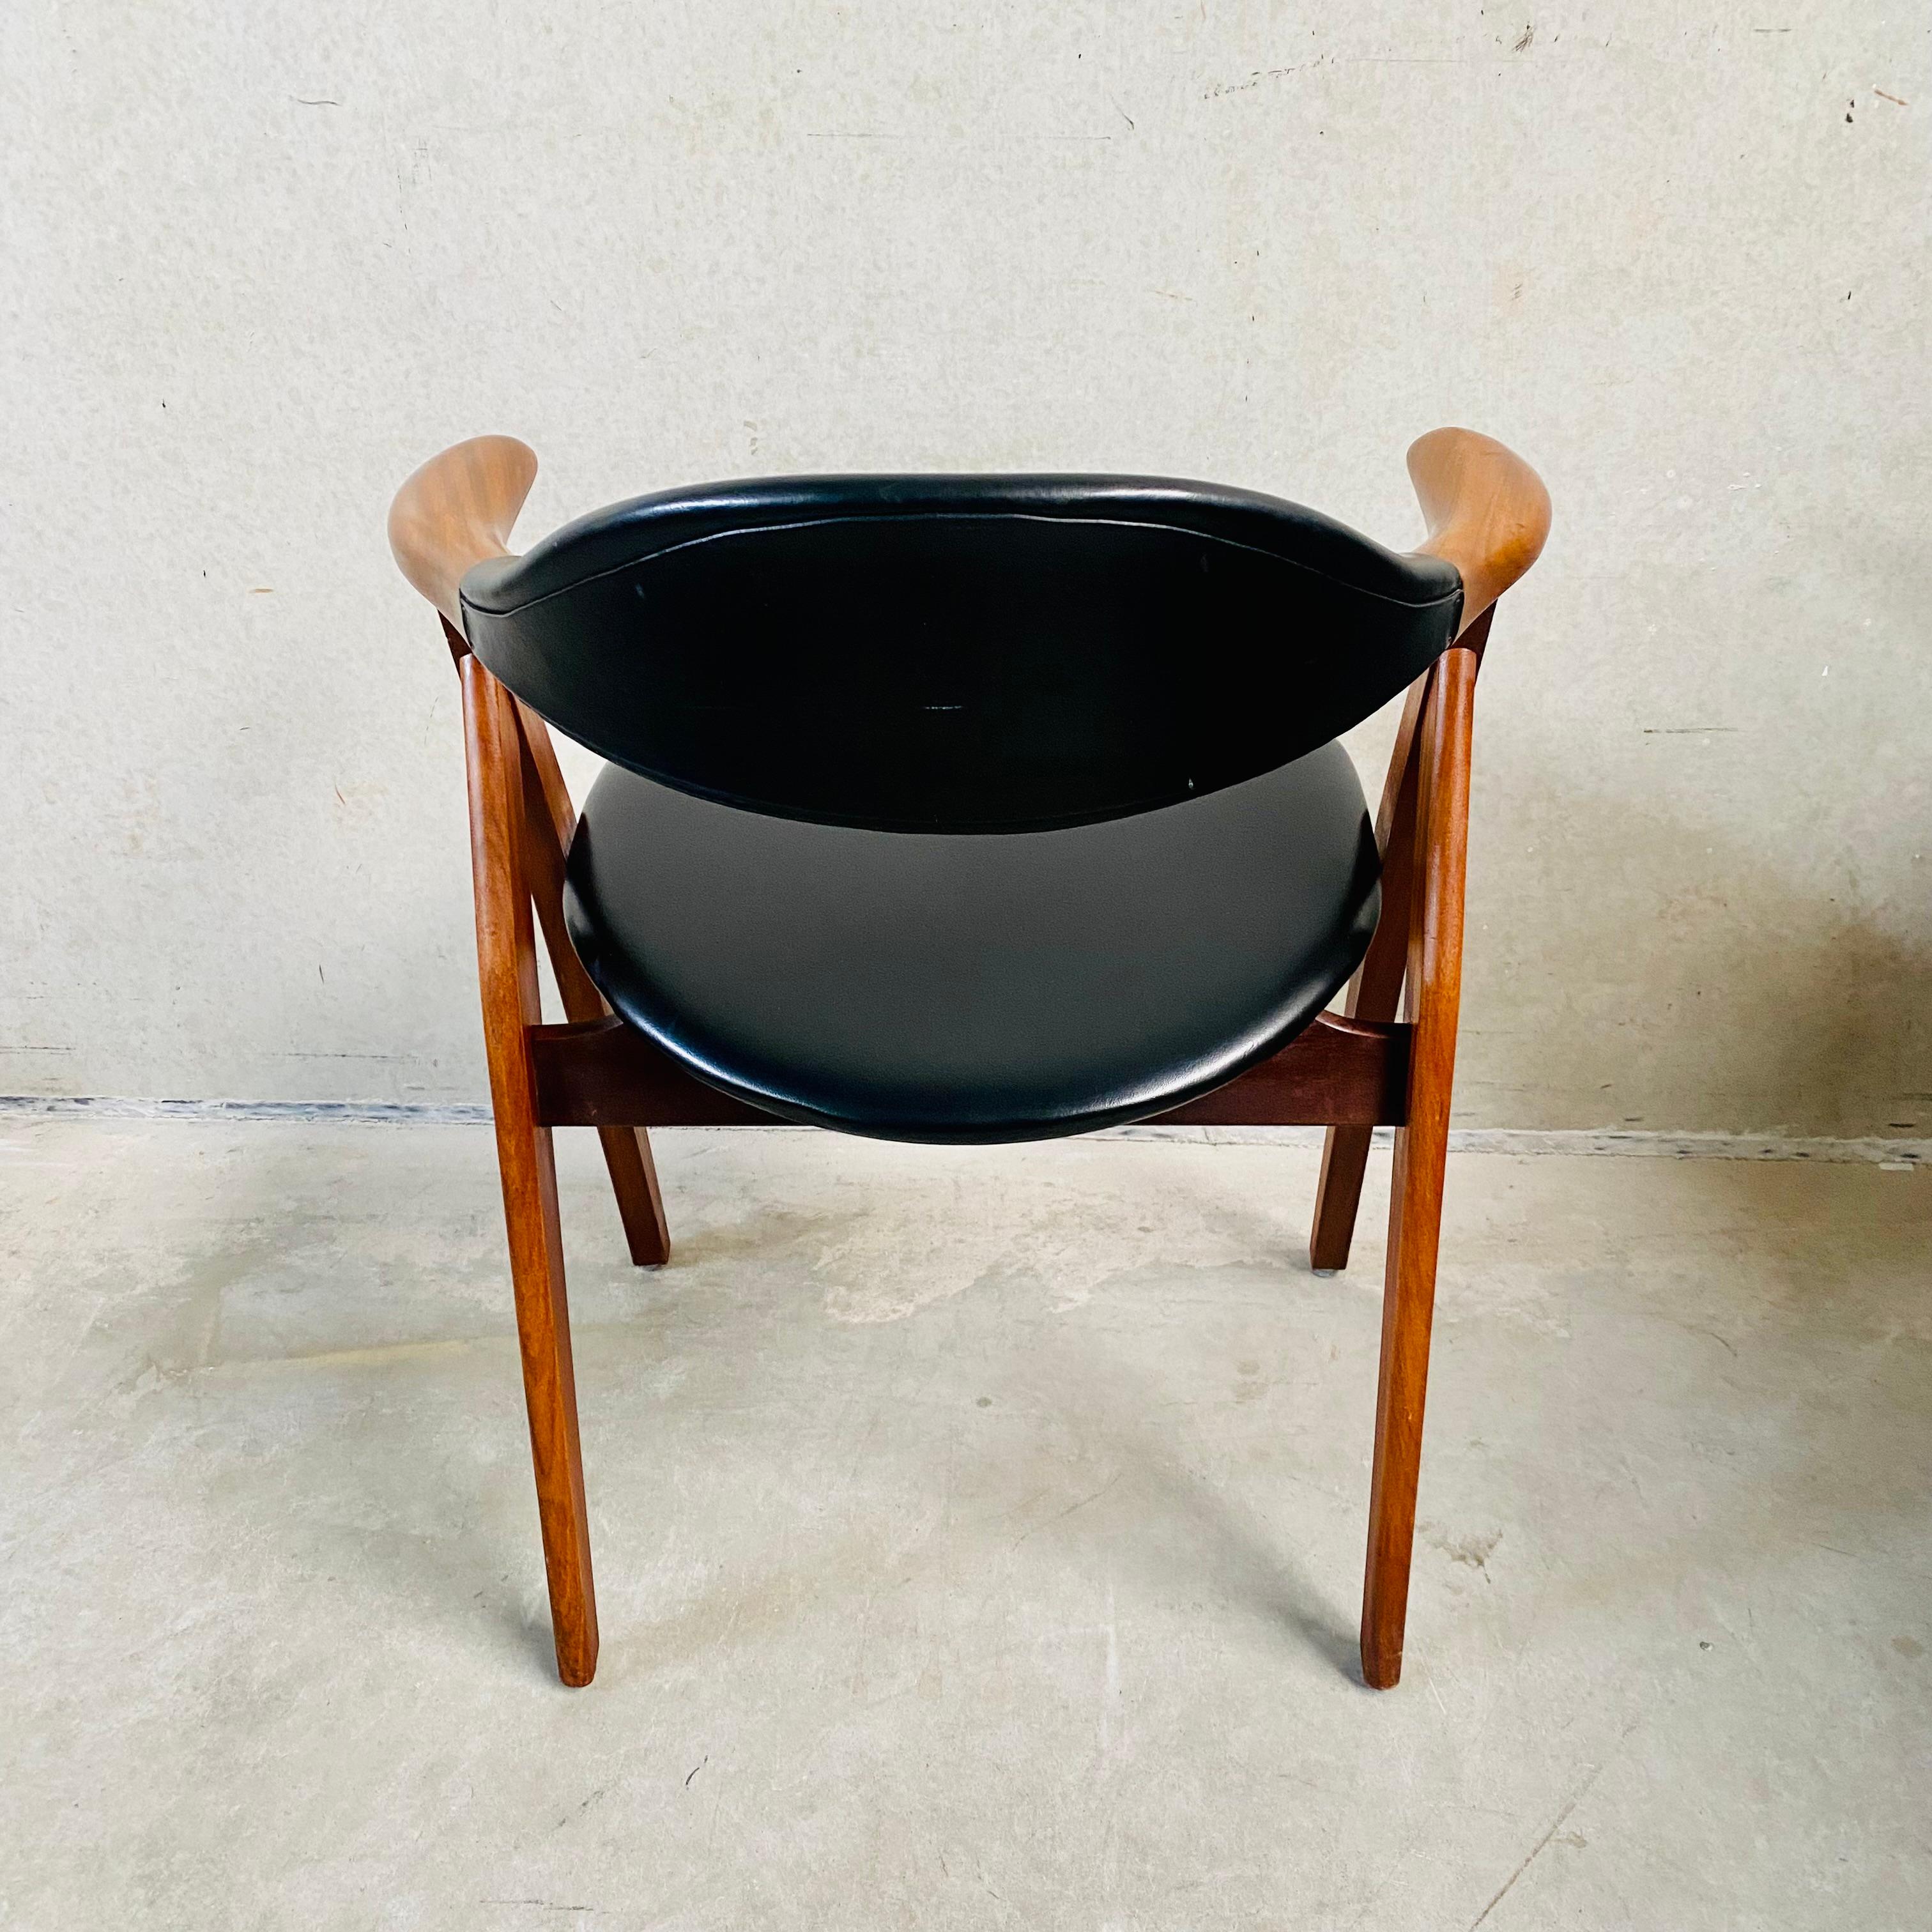 Mid-20th Century Cow Horn Chair by Tijsseling Meubelfabriek, Netherlands 1960 For Sale